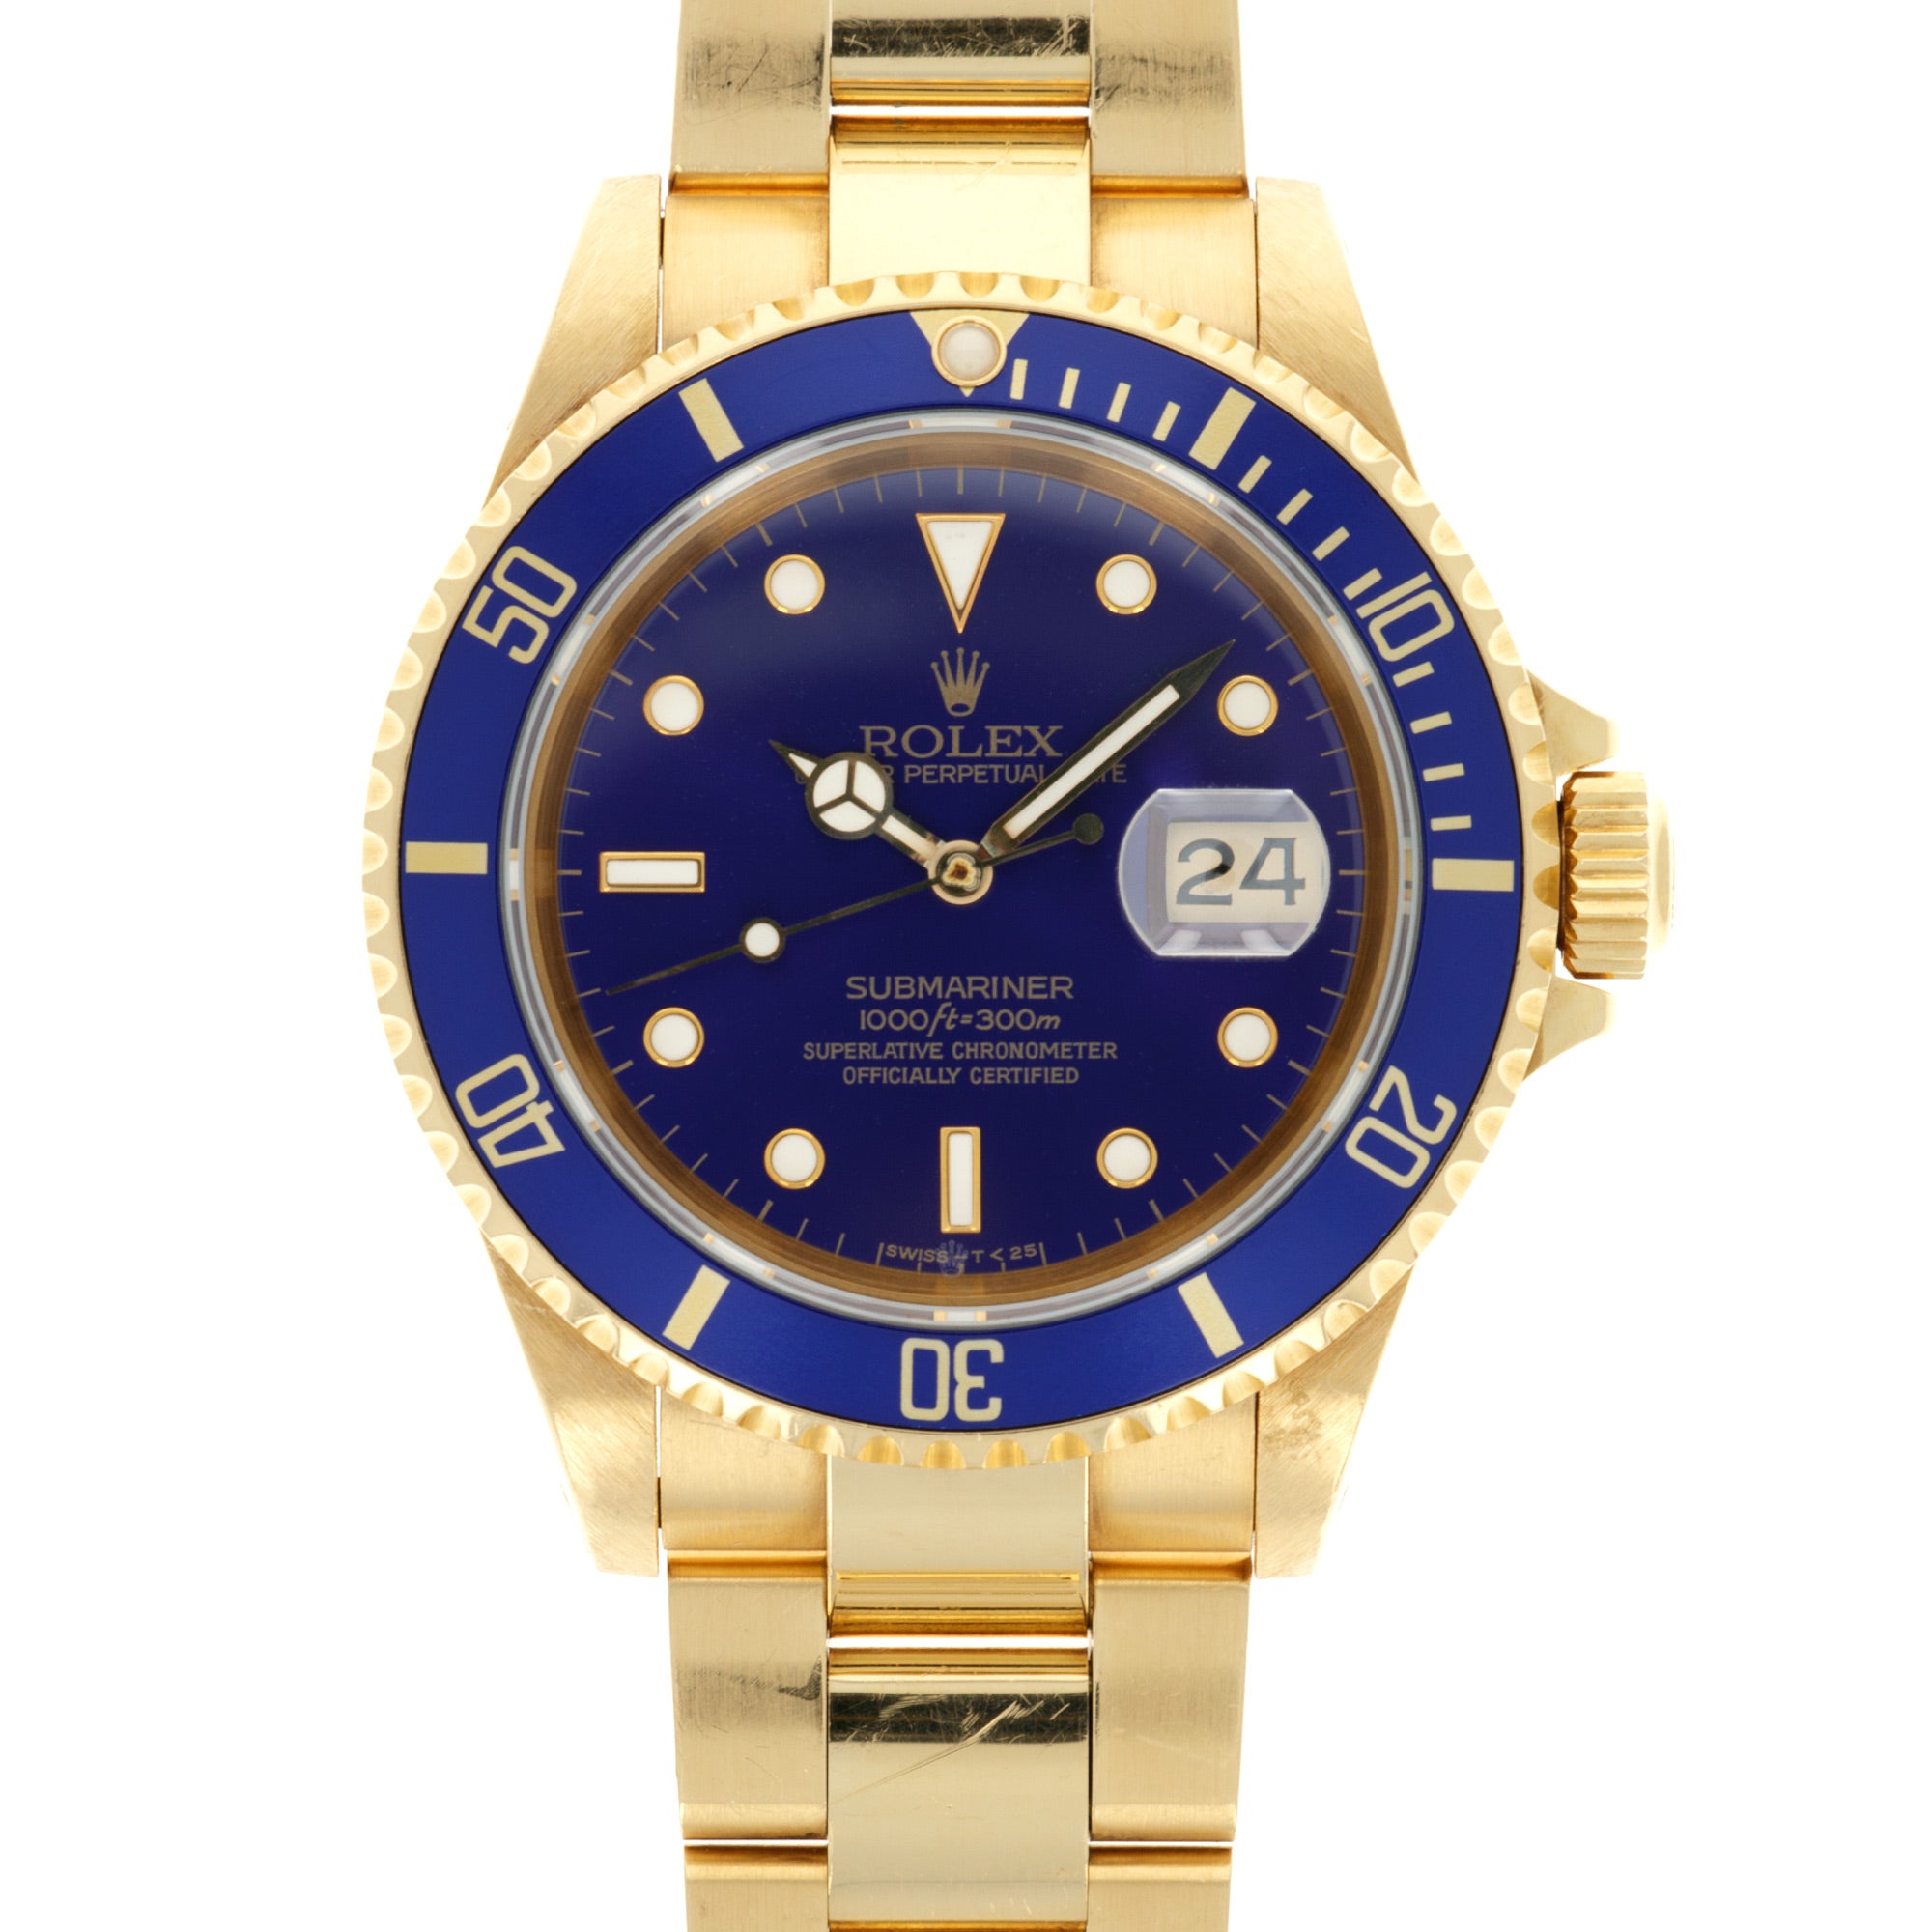 Rolex - Rolex Yellow Gold Submariner Ref. 16618 with Purple Hue Dial - The Keystone Watches